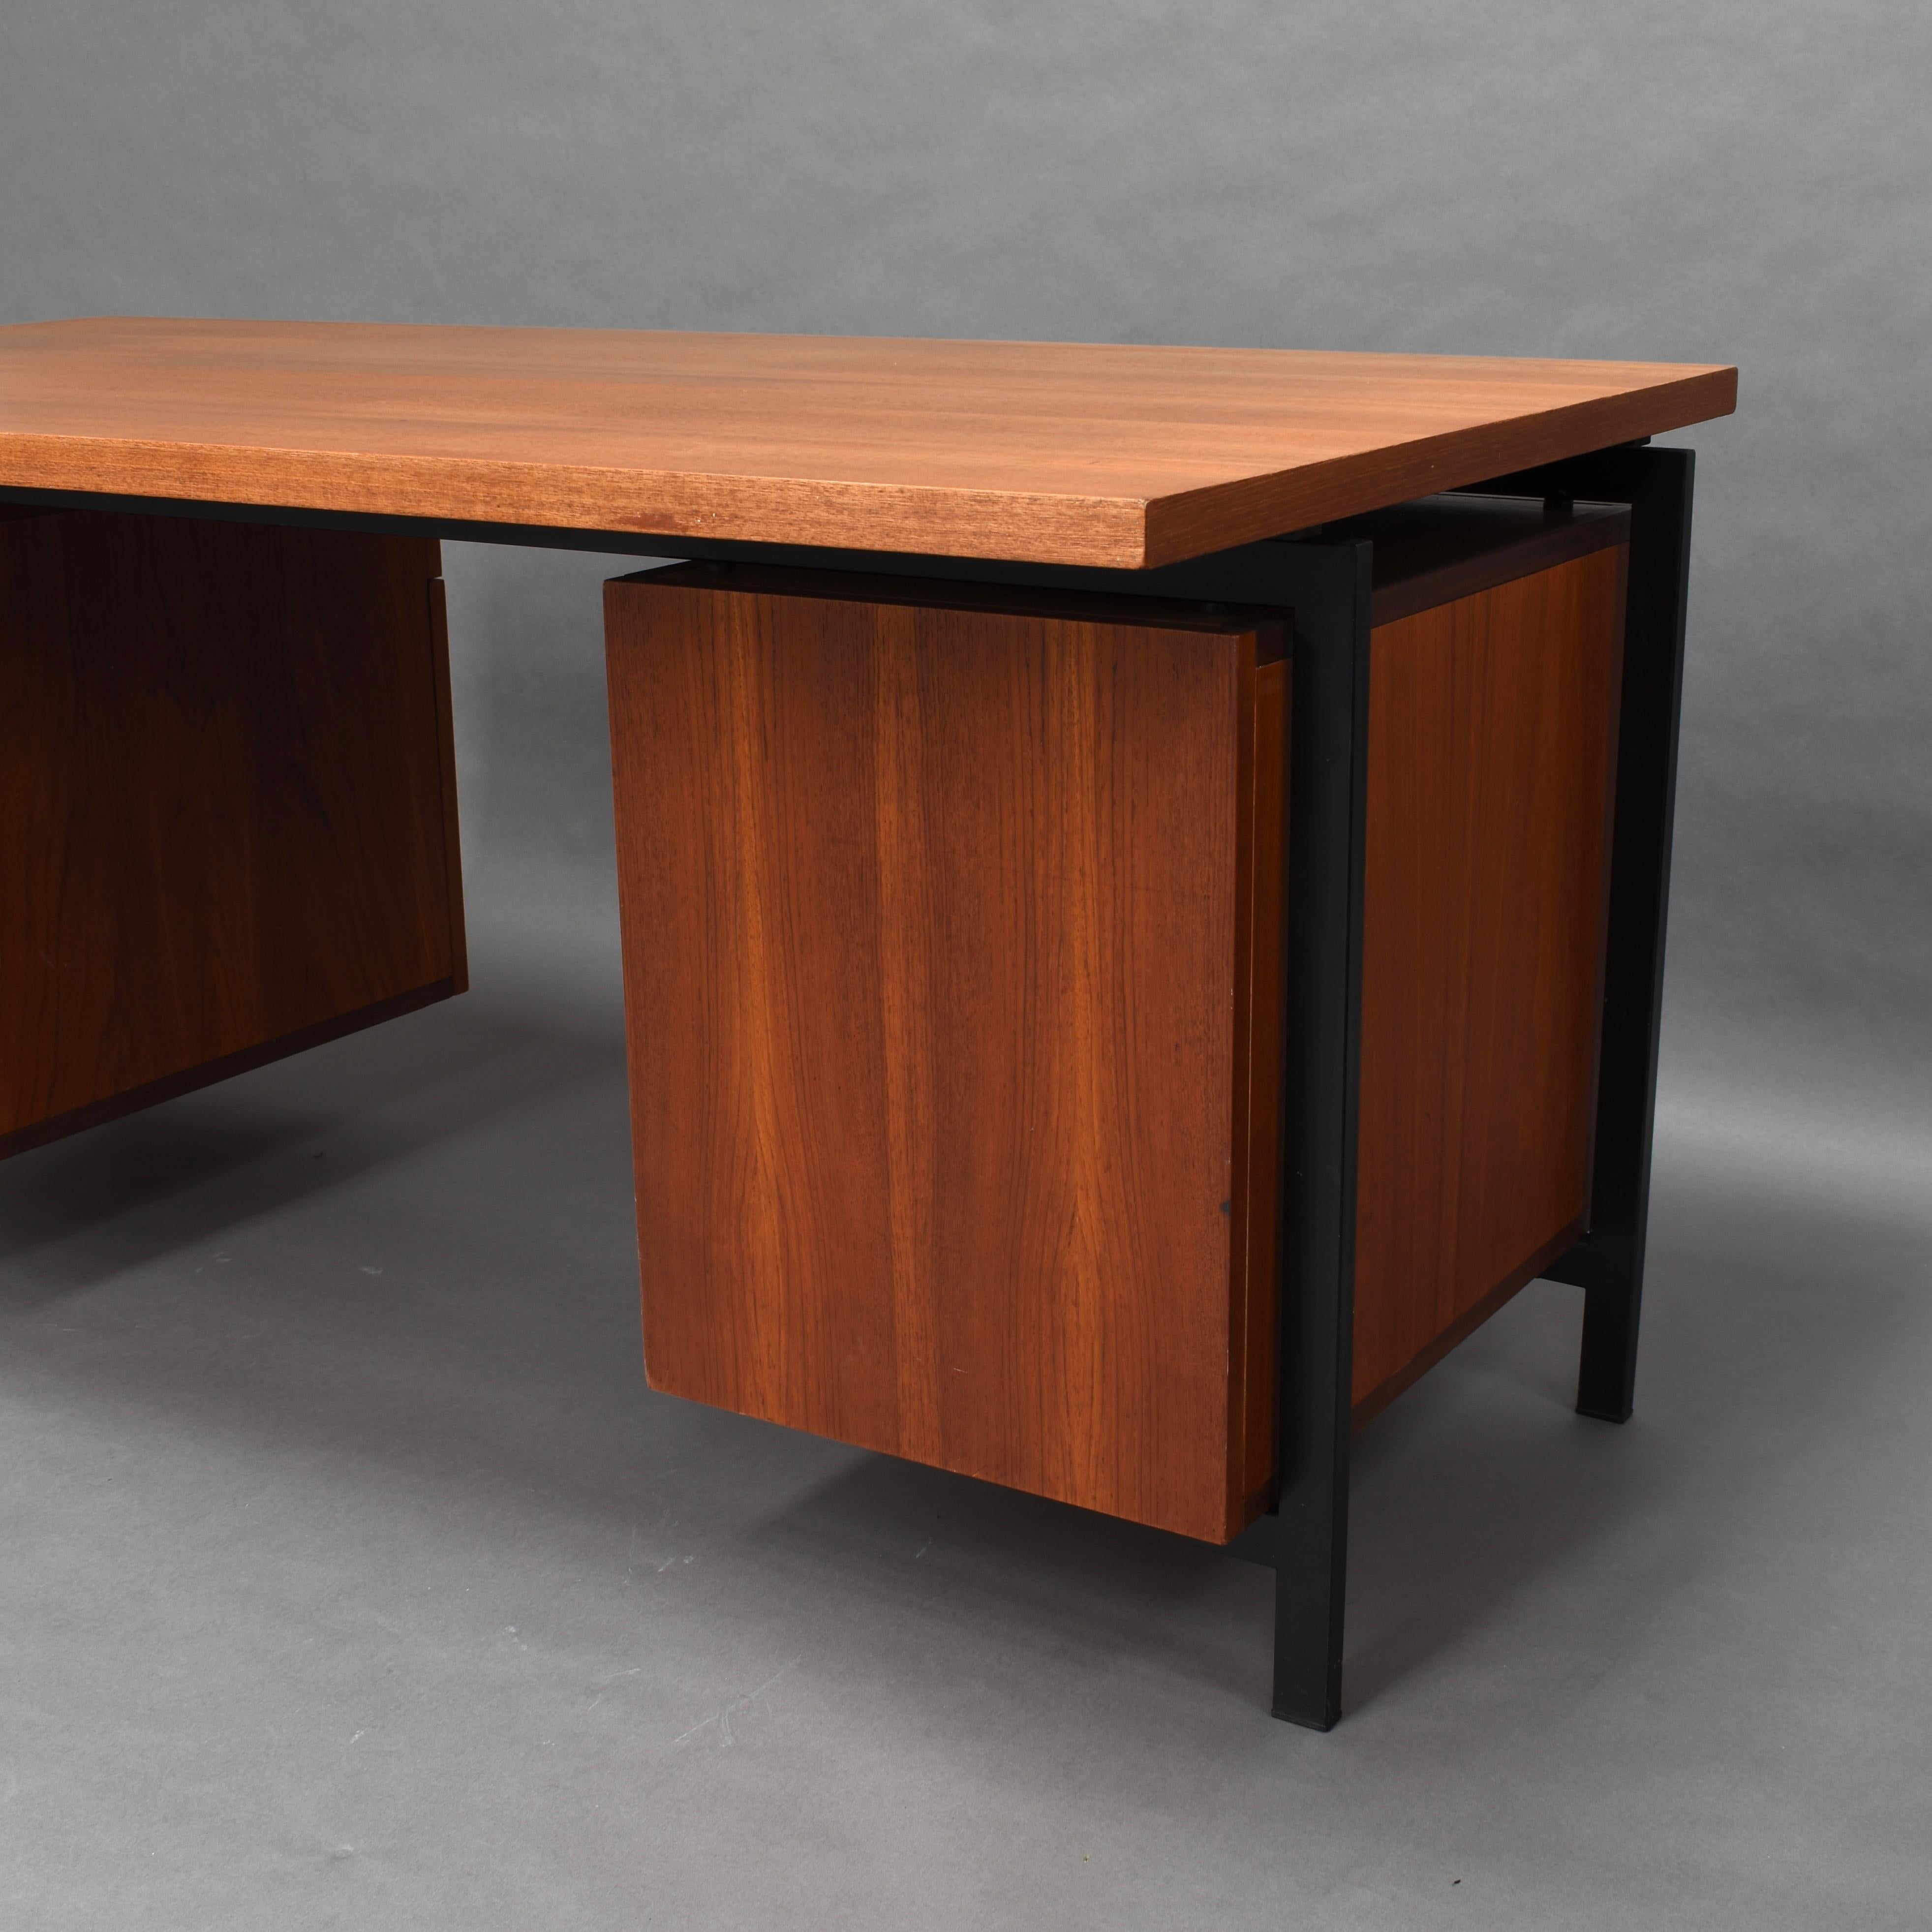 Cees Braakman for Pastoe Model EU02 Japanese Series Desk and Chair in Teak, 1950 For Sale 1